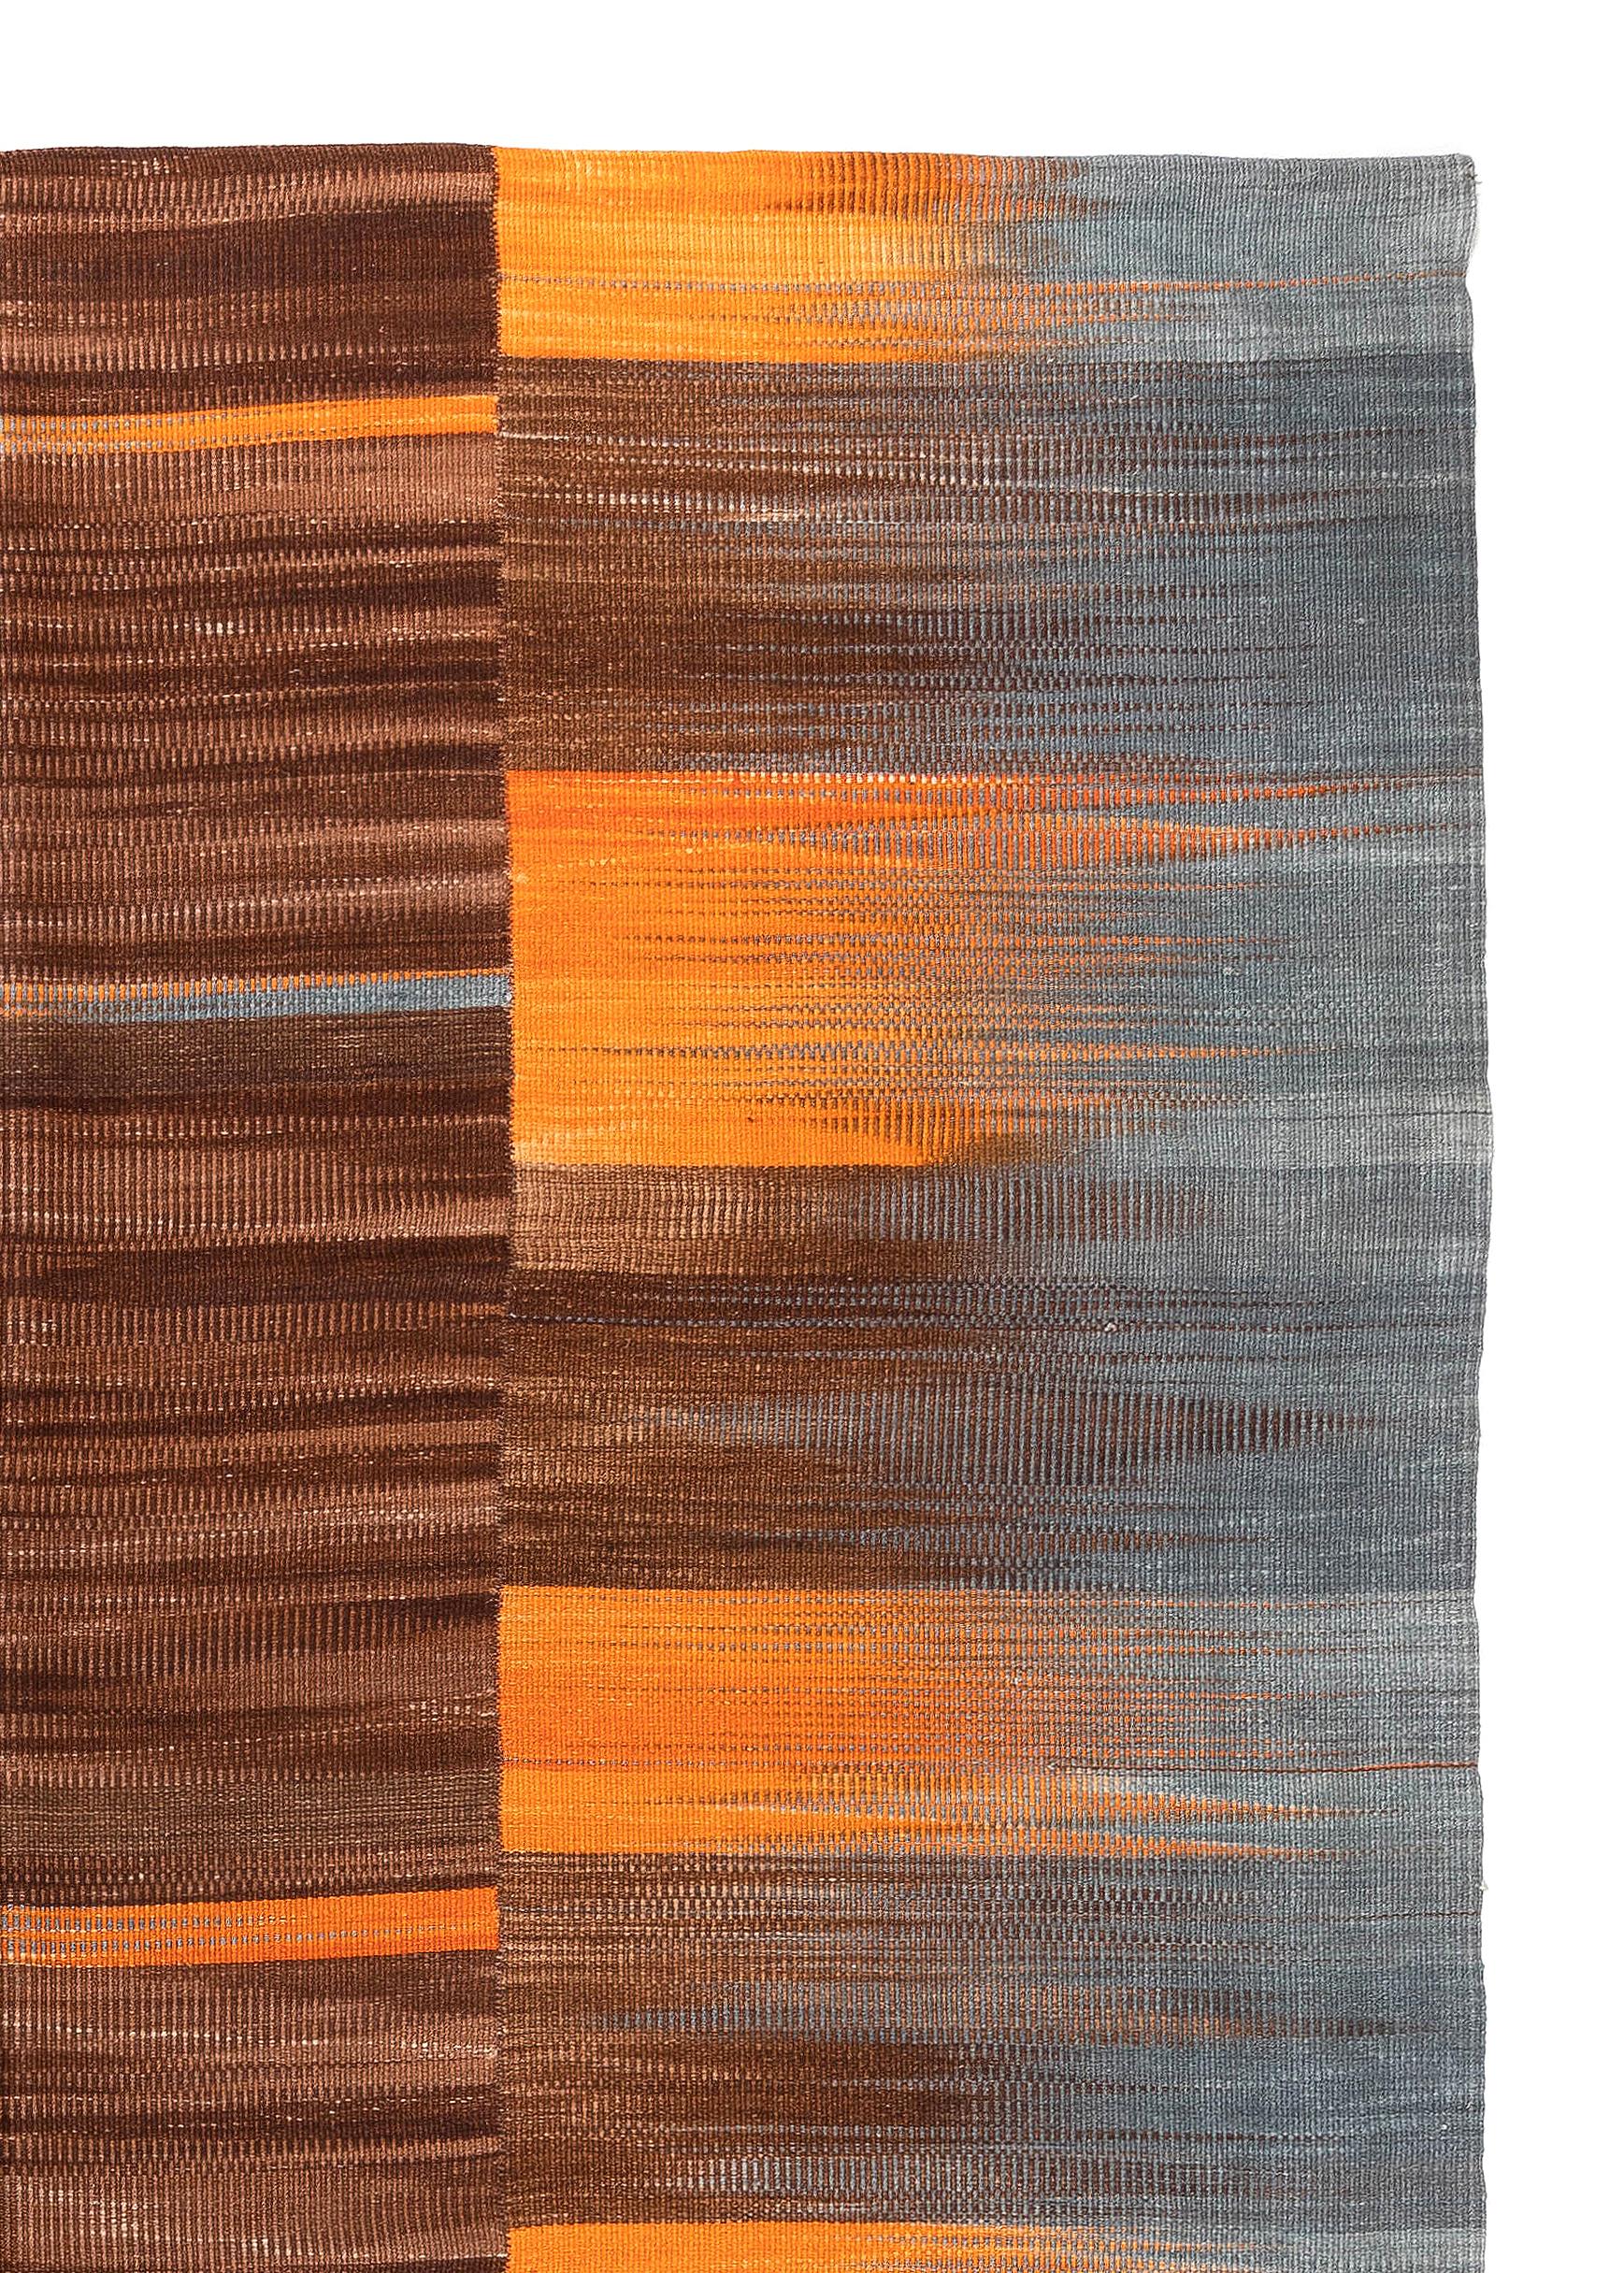 Contemporary 7'8'' x 10'9' New Turkish Kilim, Modern Double Sided Rug in Orange, Gray & Brown For Sale